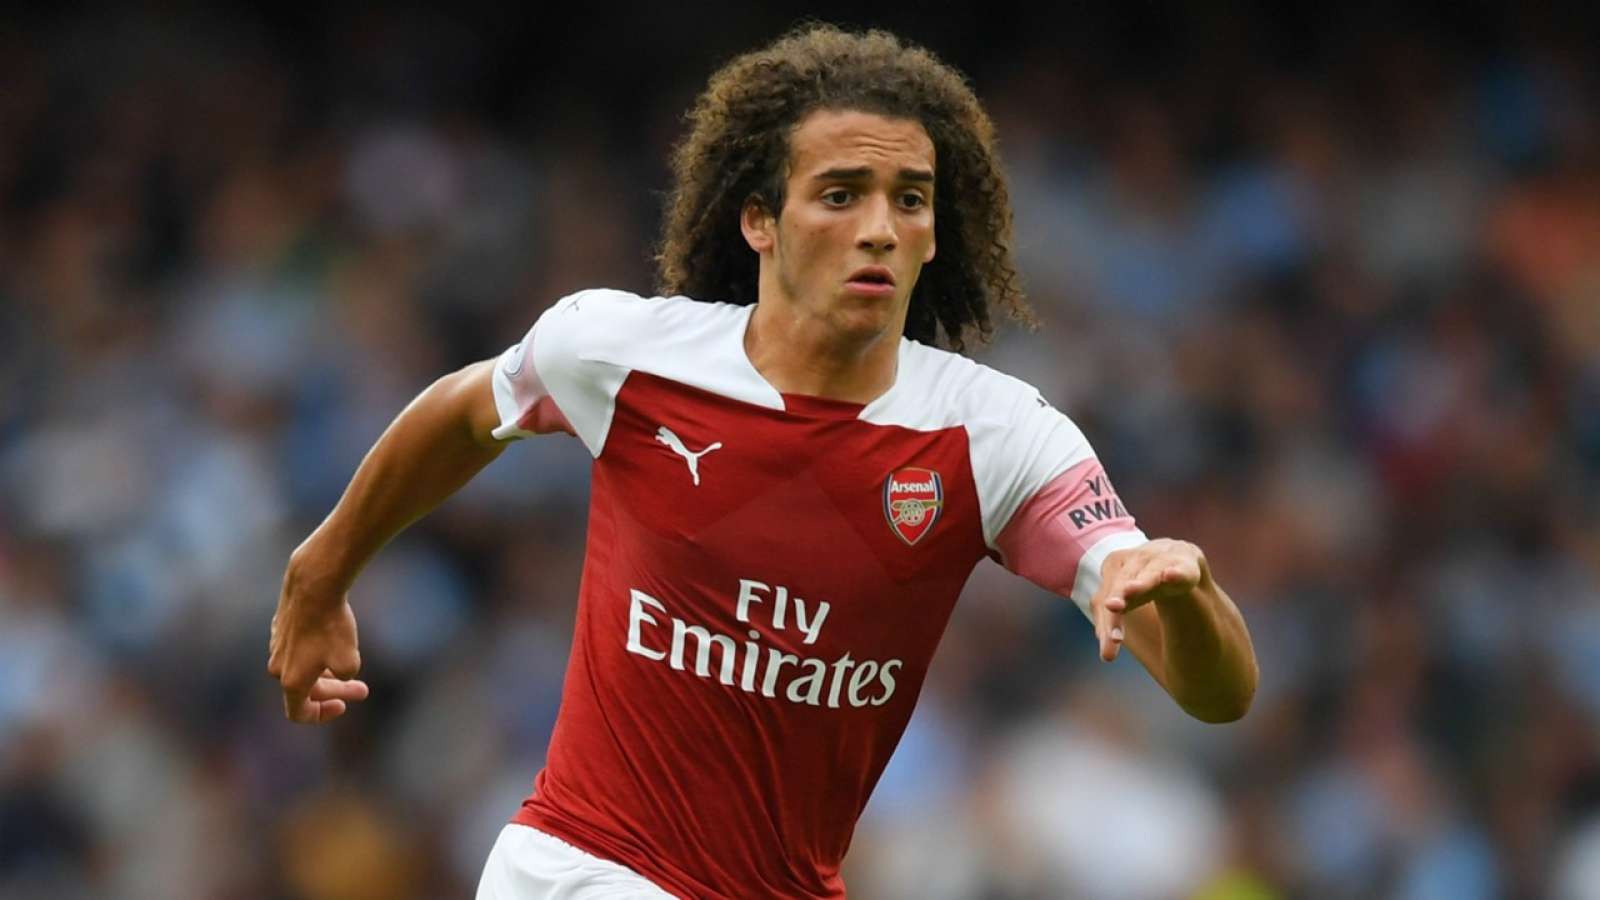 Matteo Guendouzi: 5 things to know about Arsenal midfielder